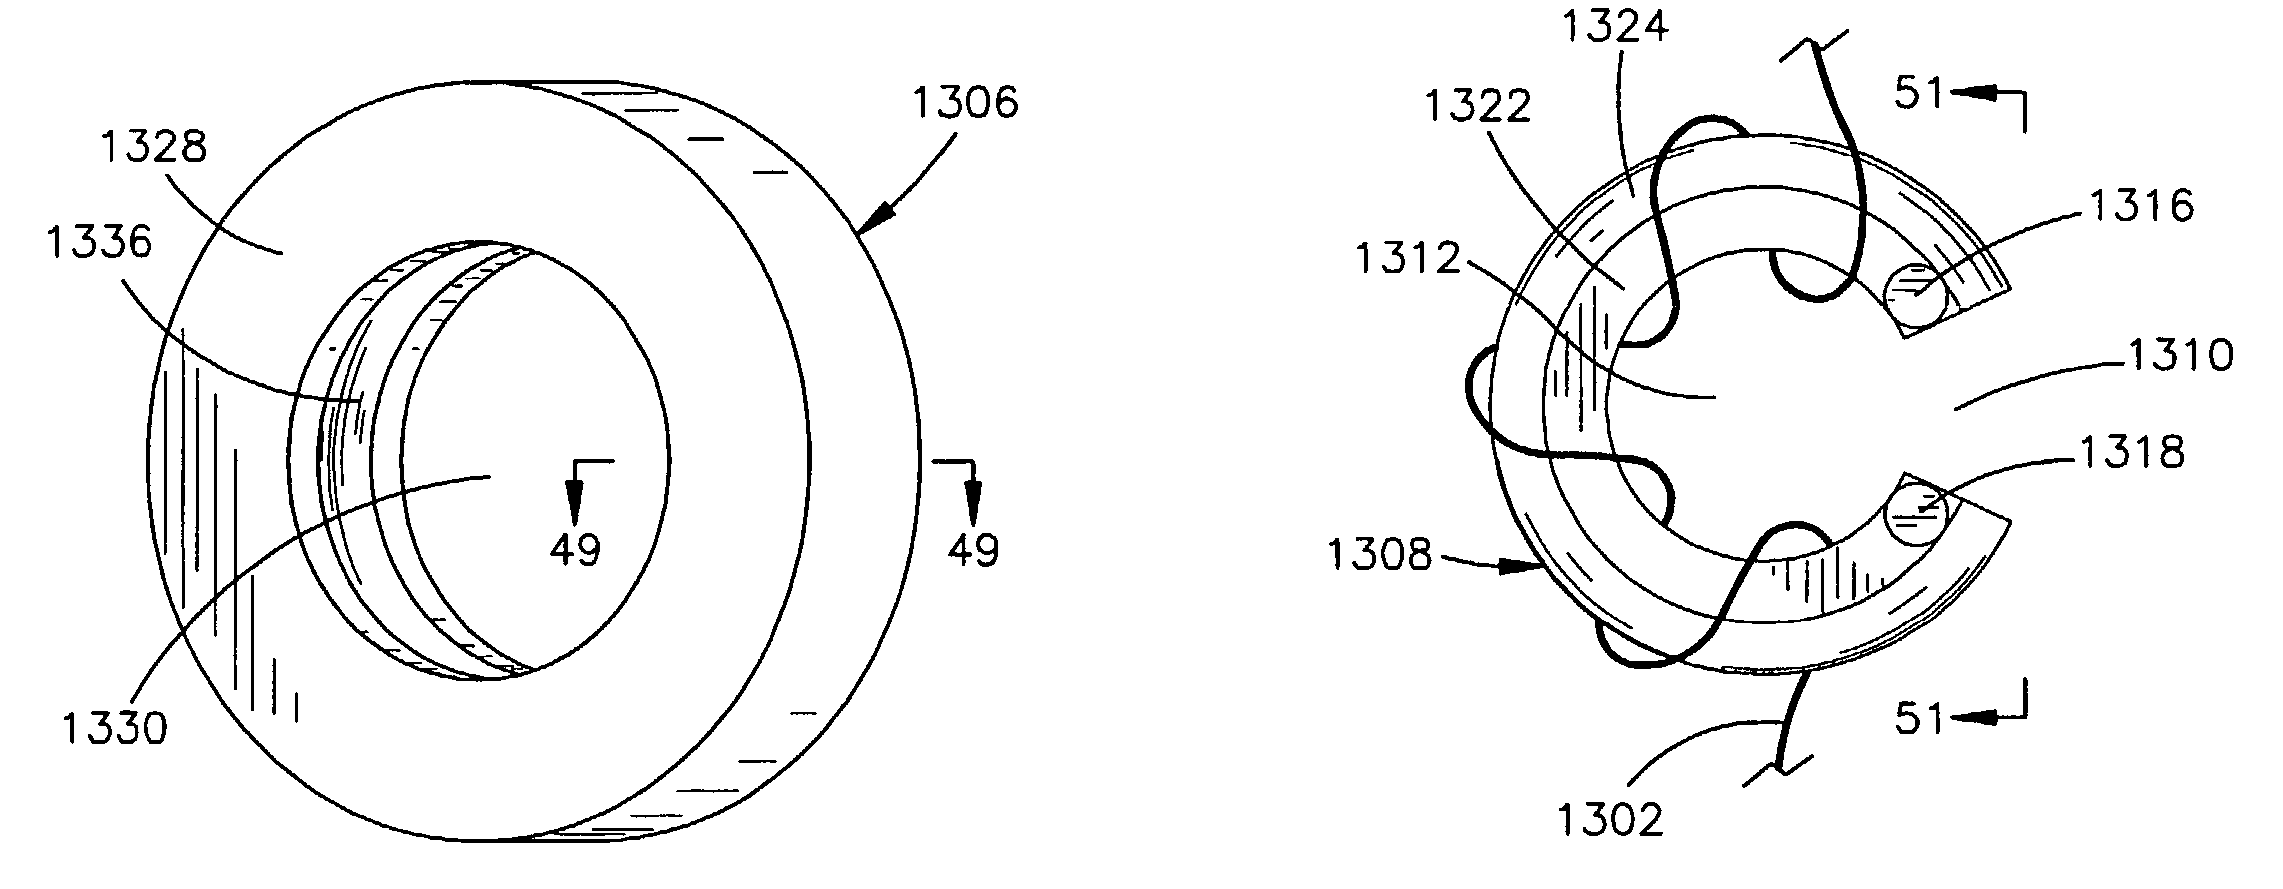 Method and apparatus for securing a suture